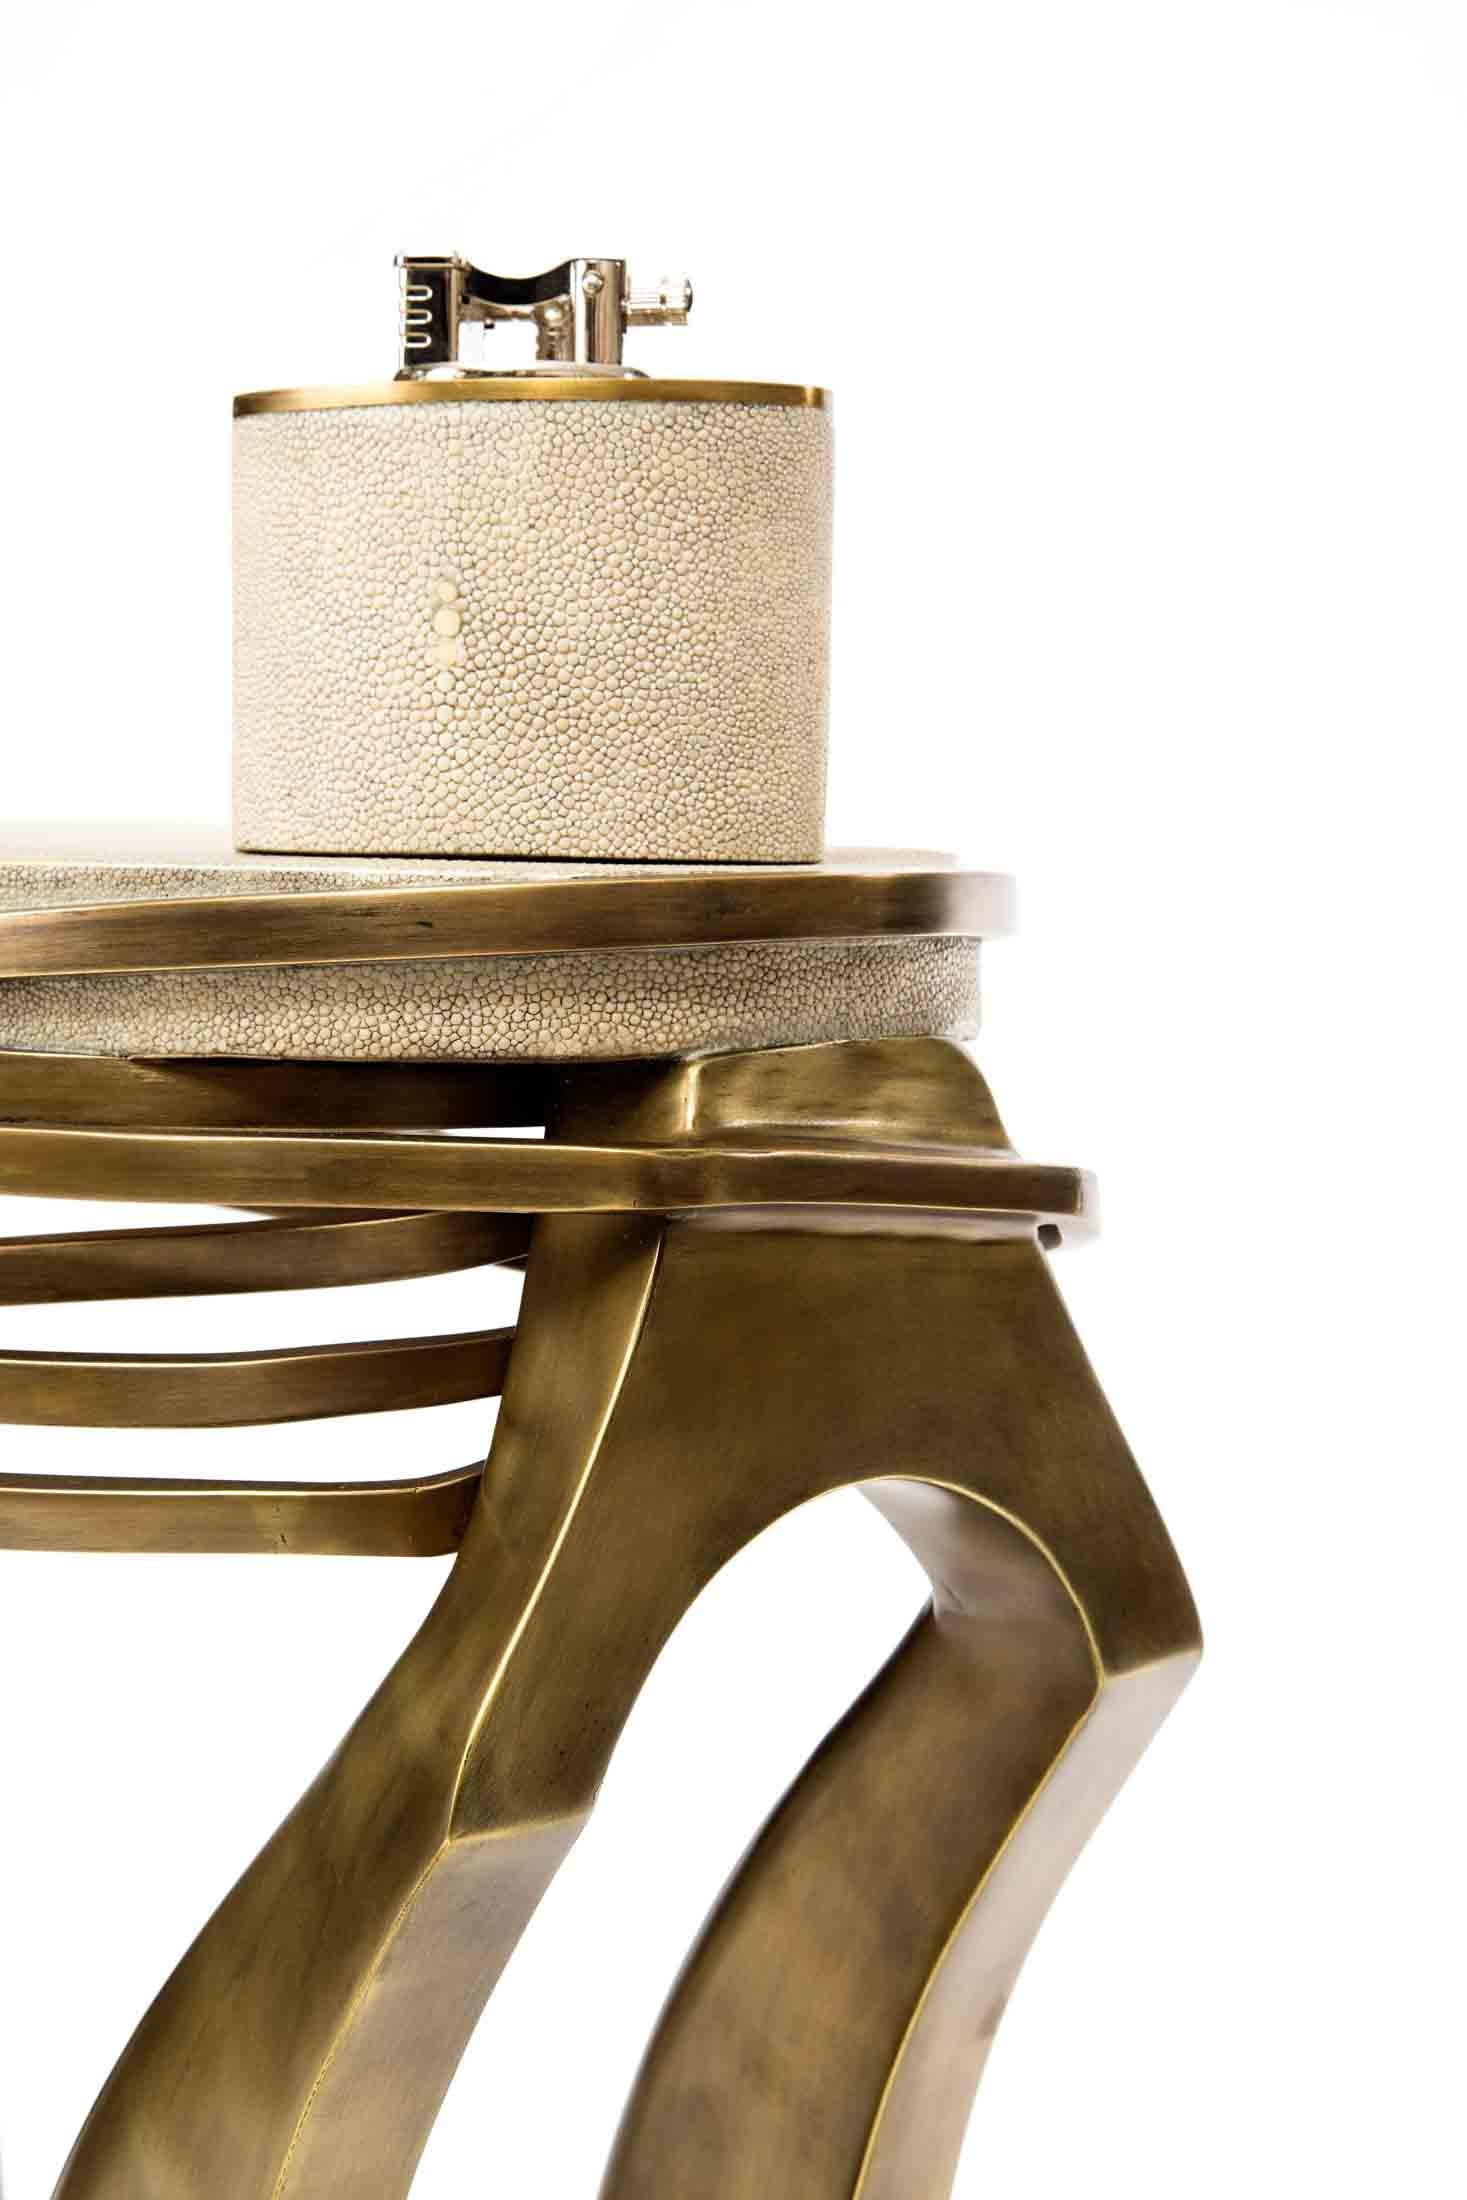 Hand-Crafted Shagreen Side Table with Sculptural Bronze-Patina Brass Details by Kifu Paris For Sale